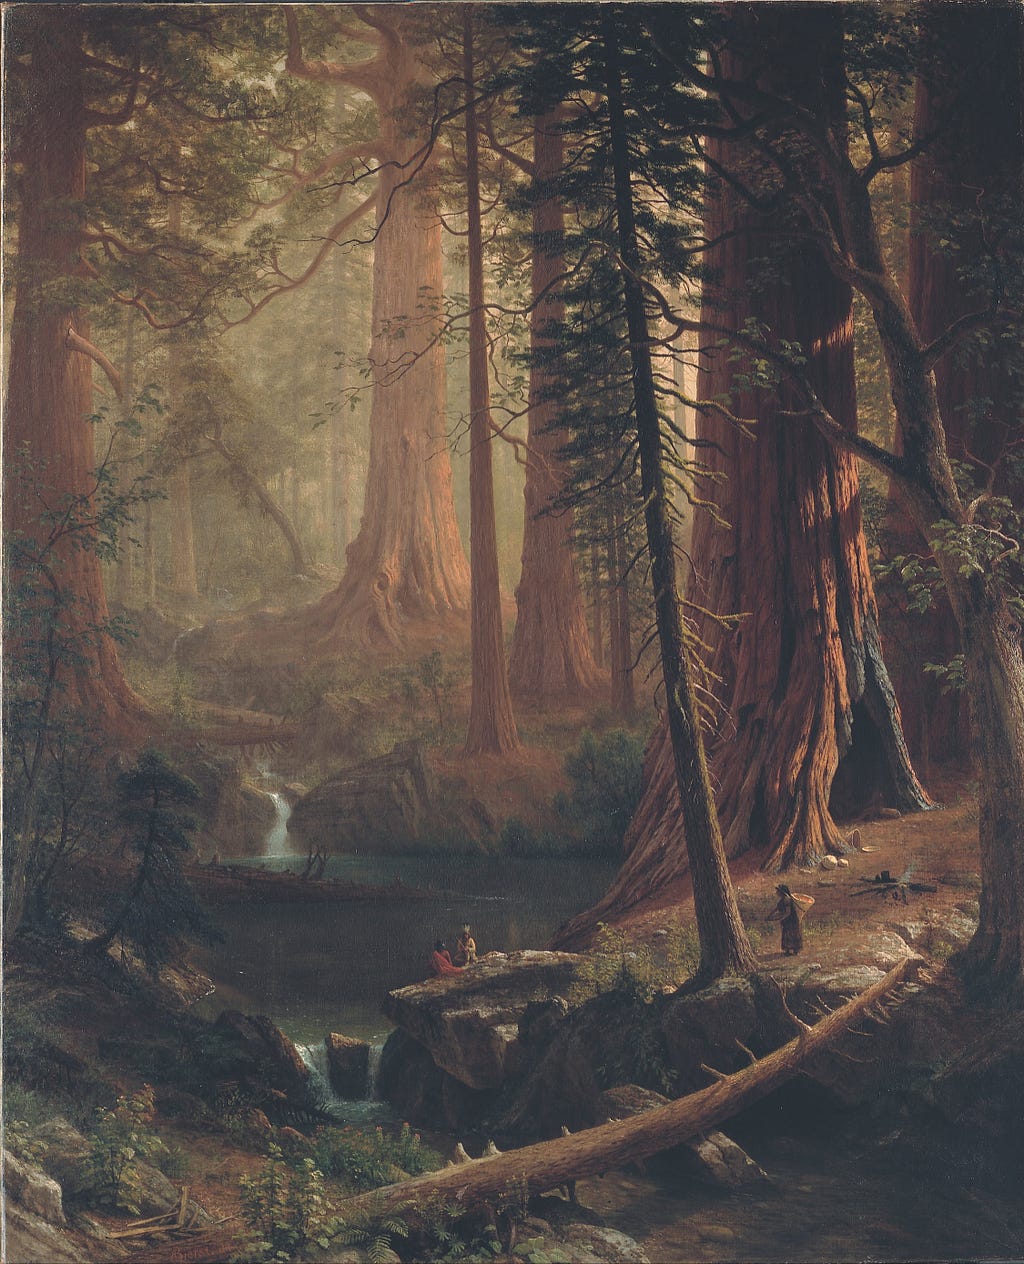 Giant Redwood Trees of California an oil painting from 1874 by  Albert Bierstadt. In order to help the viewer to understand the sheer scale of these huge Redwood trees, the artist places several figures in the foreground who look pretty tiny in comparison.